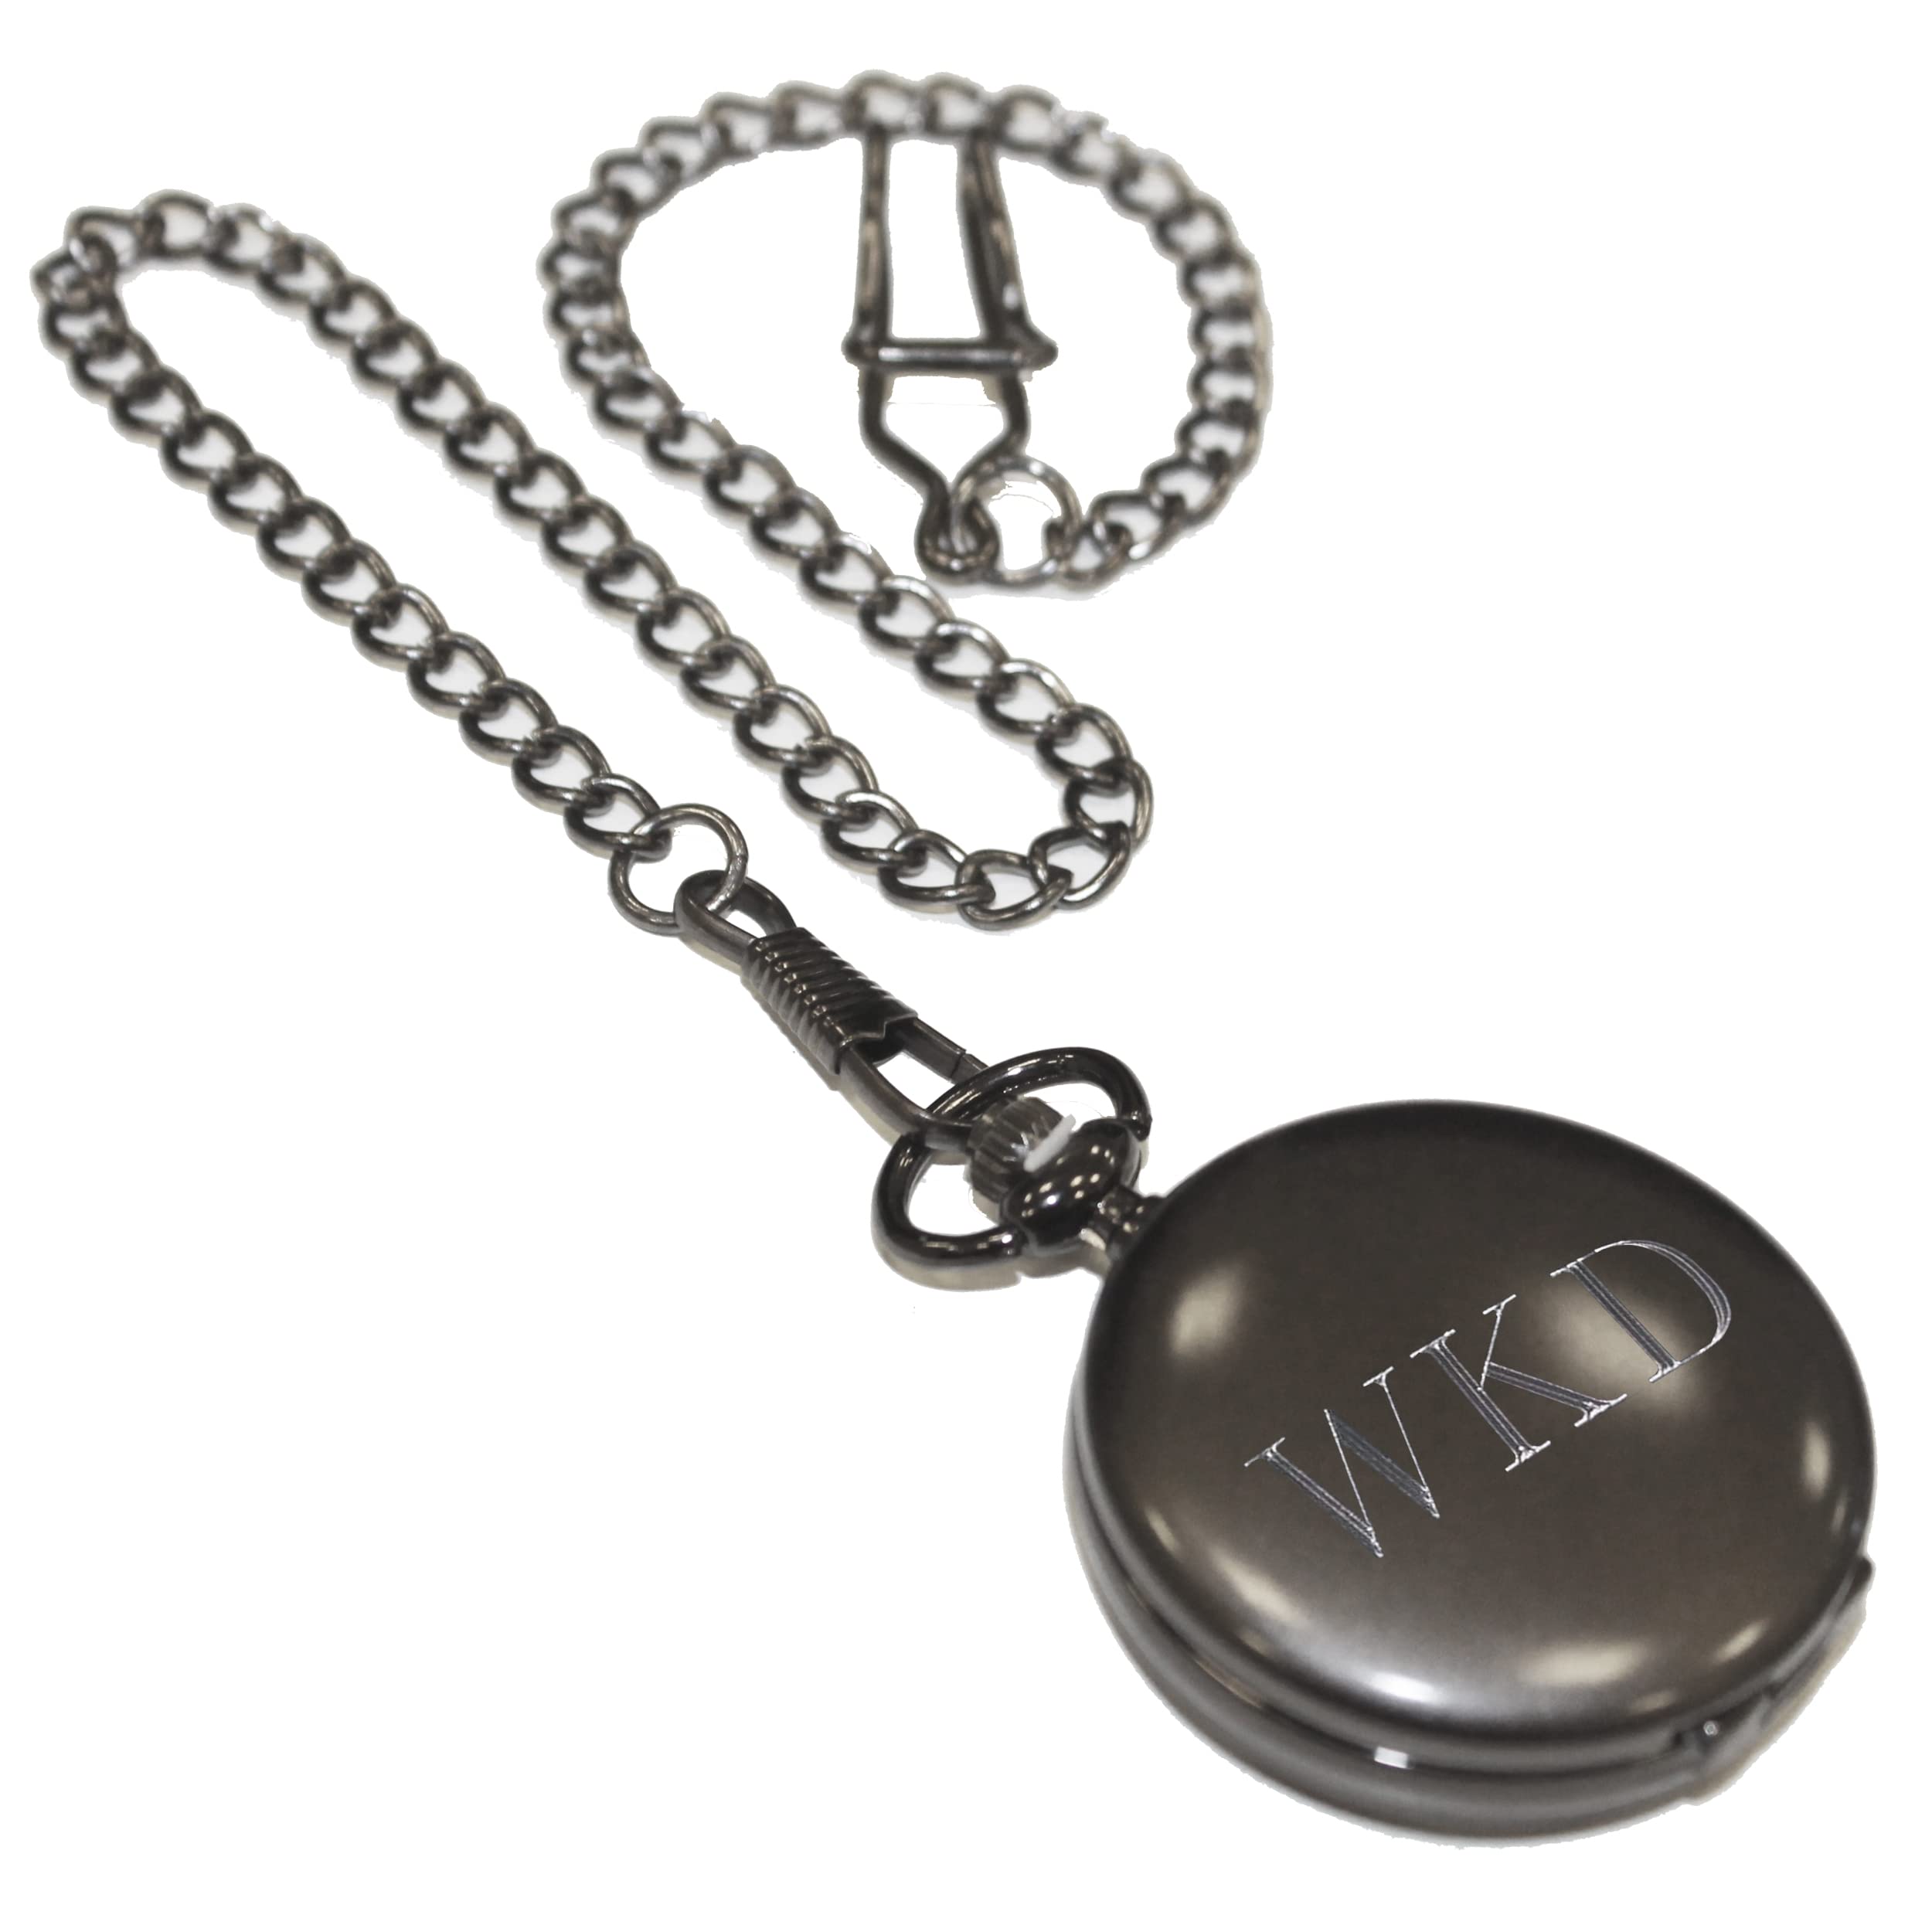 My Personal Memories, Personalized Gunmetal Quartz Pocket Watch with Chain - Groomsmen Wedding Party - Engraved